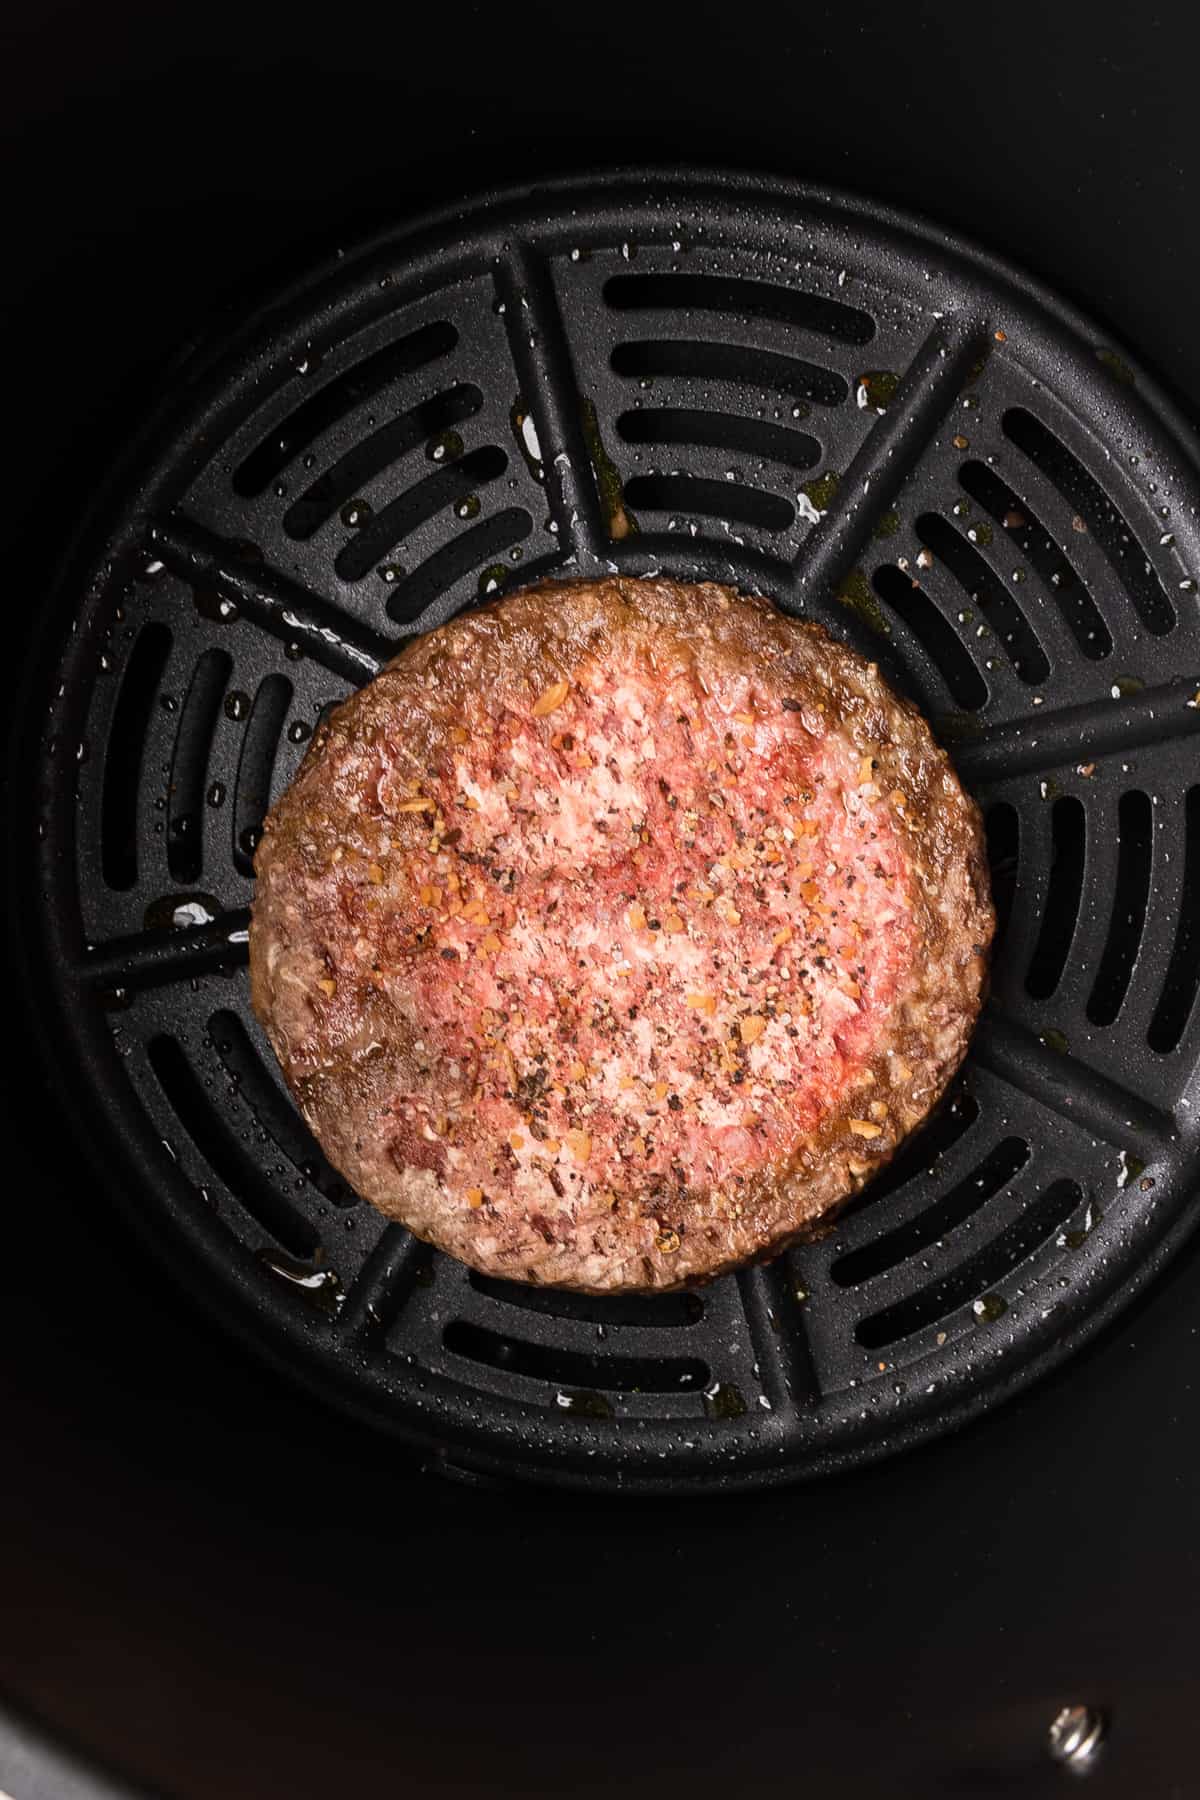 the frozen burger cooked at the halfway point.